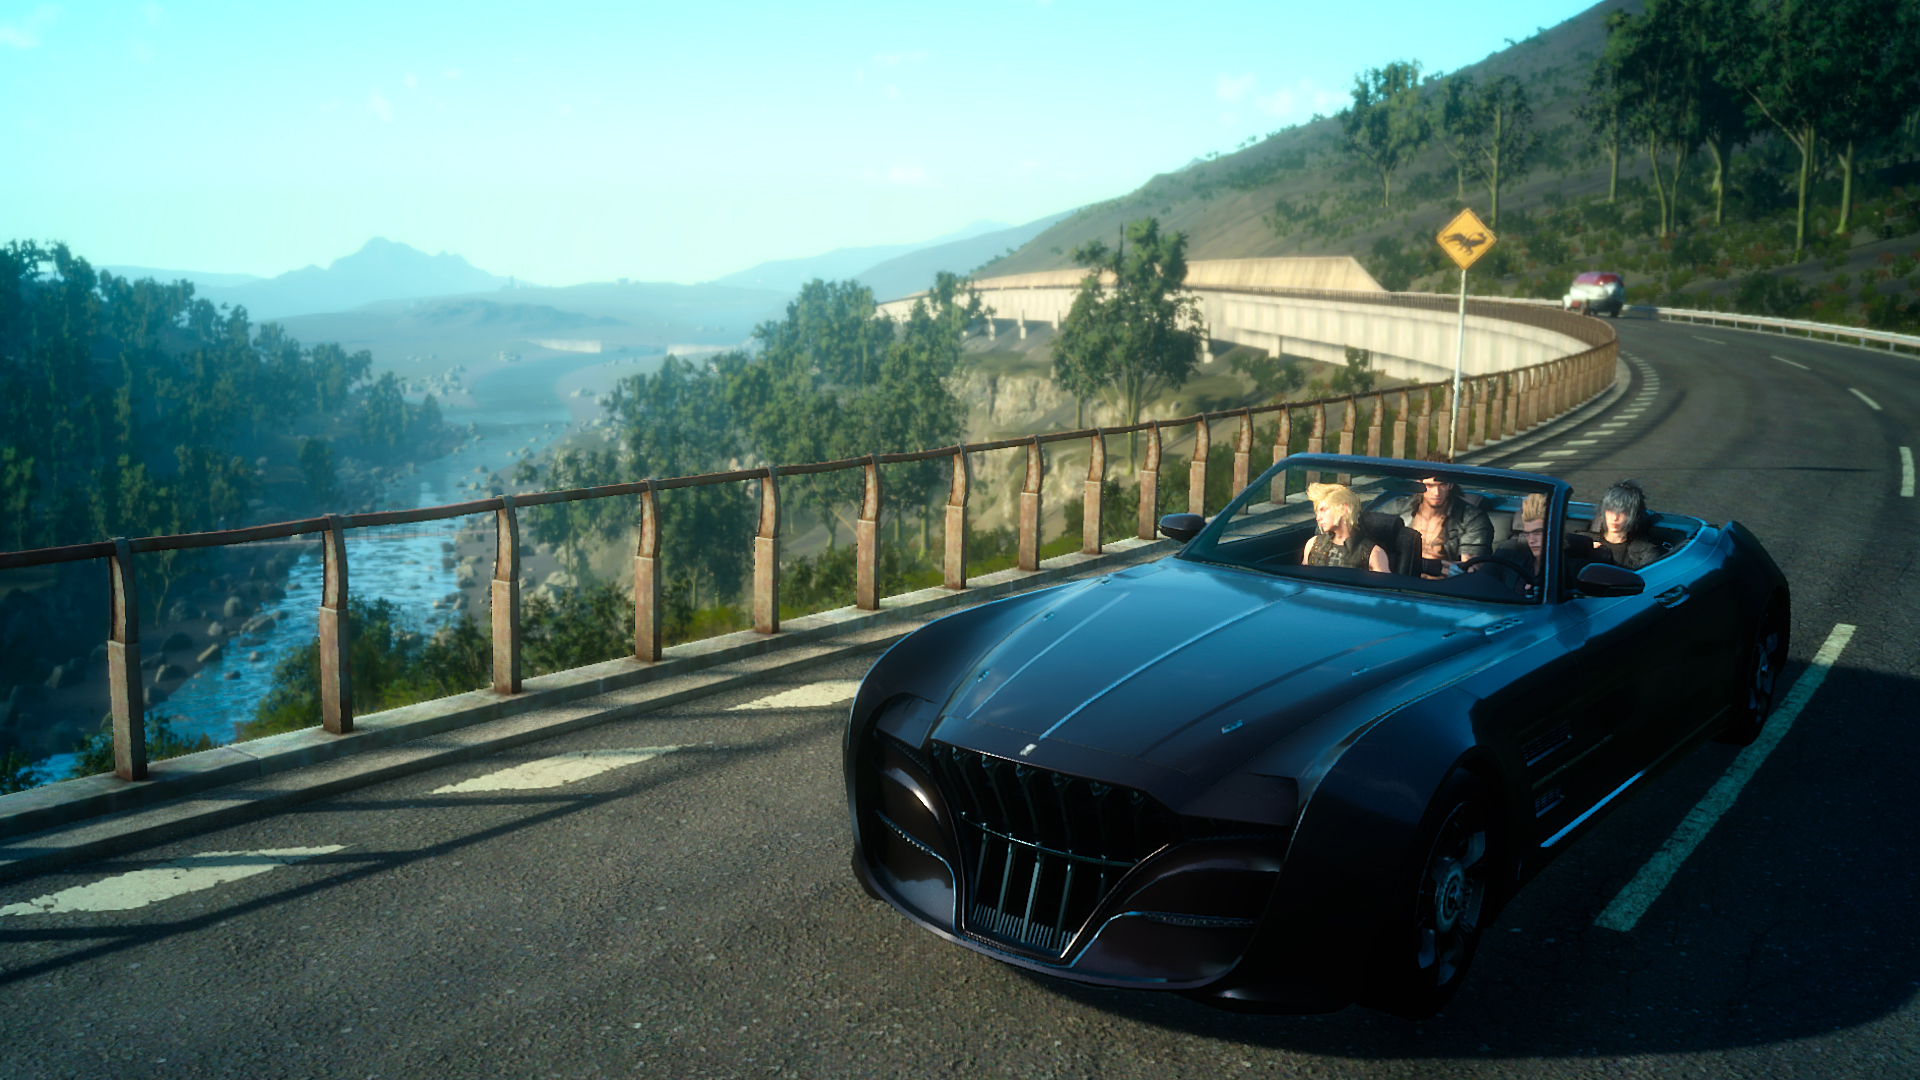 Quest Information Revealed for “Final Fantasy XV” - 